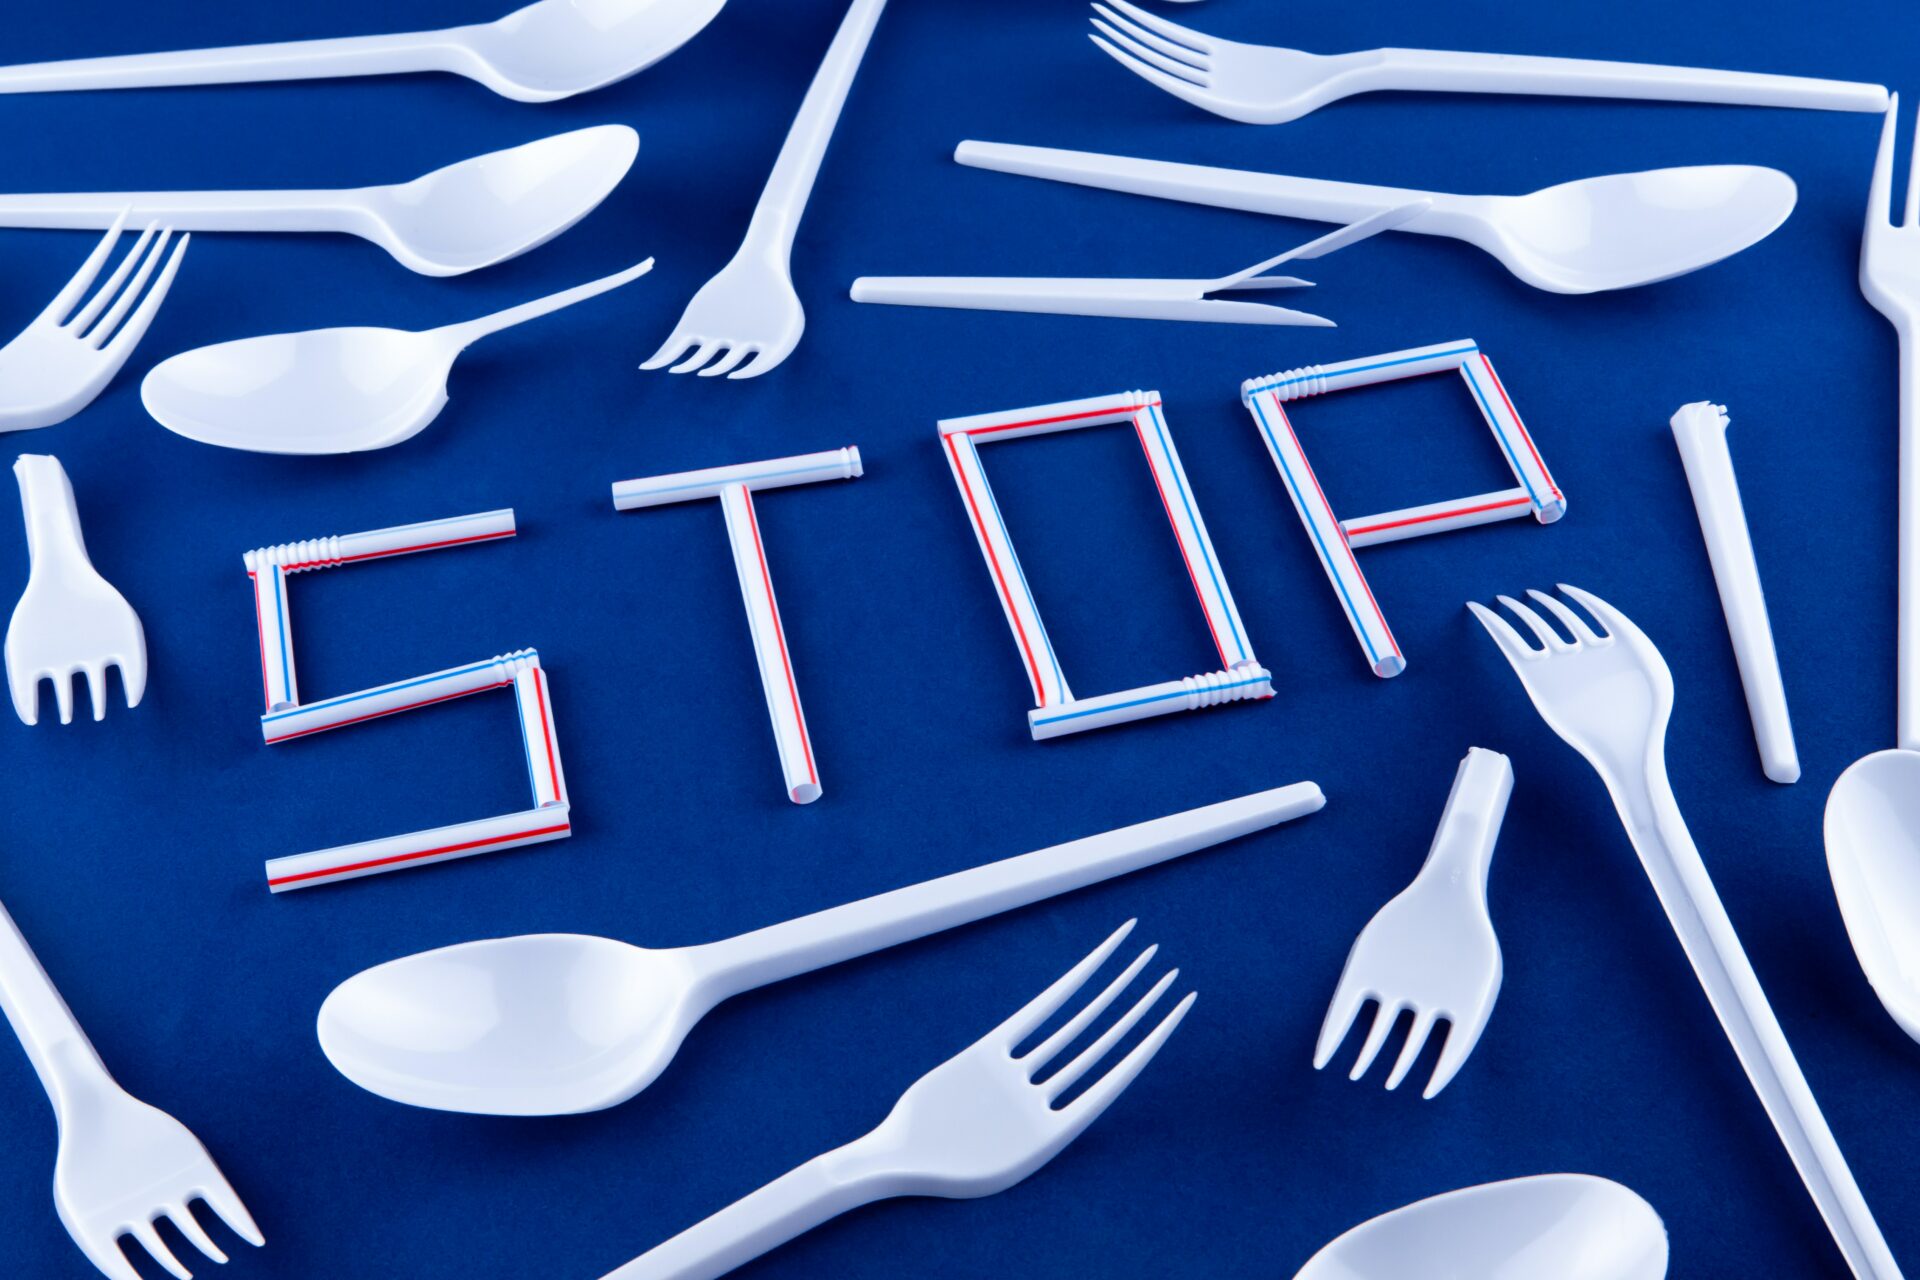 The word stop made of plastic tubes on a blue background with plastic utensils environmental pollution concept. Top view